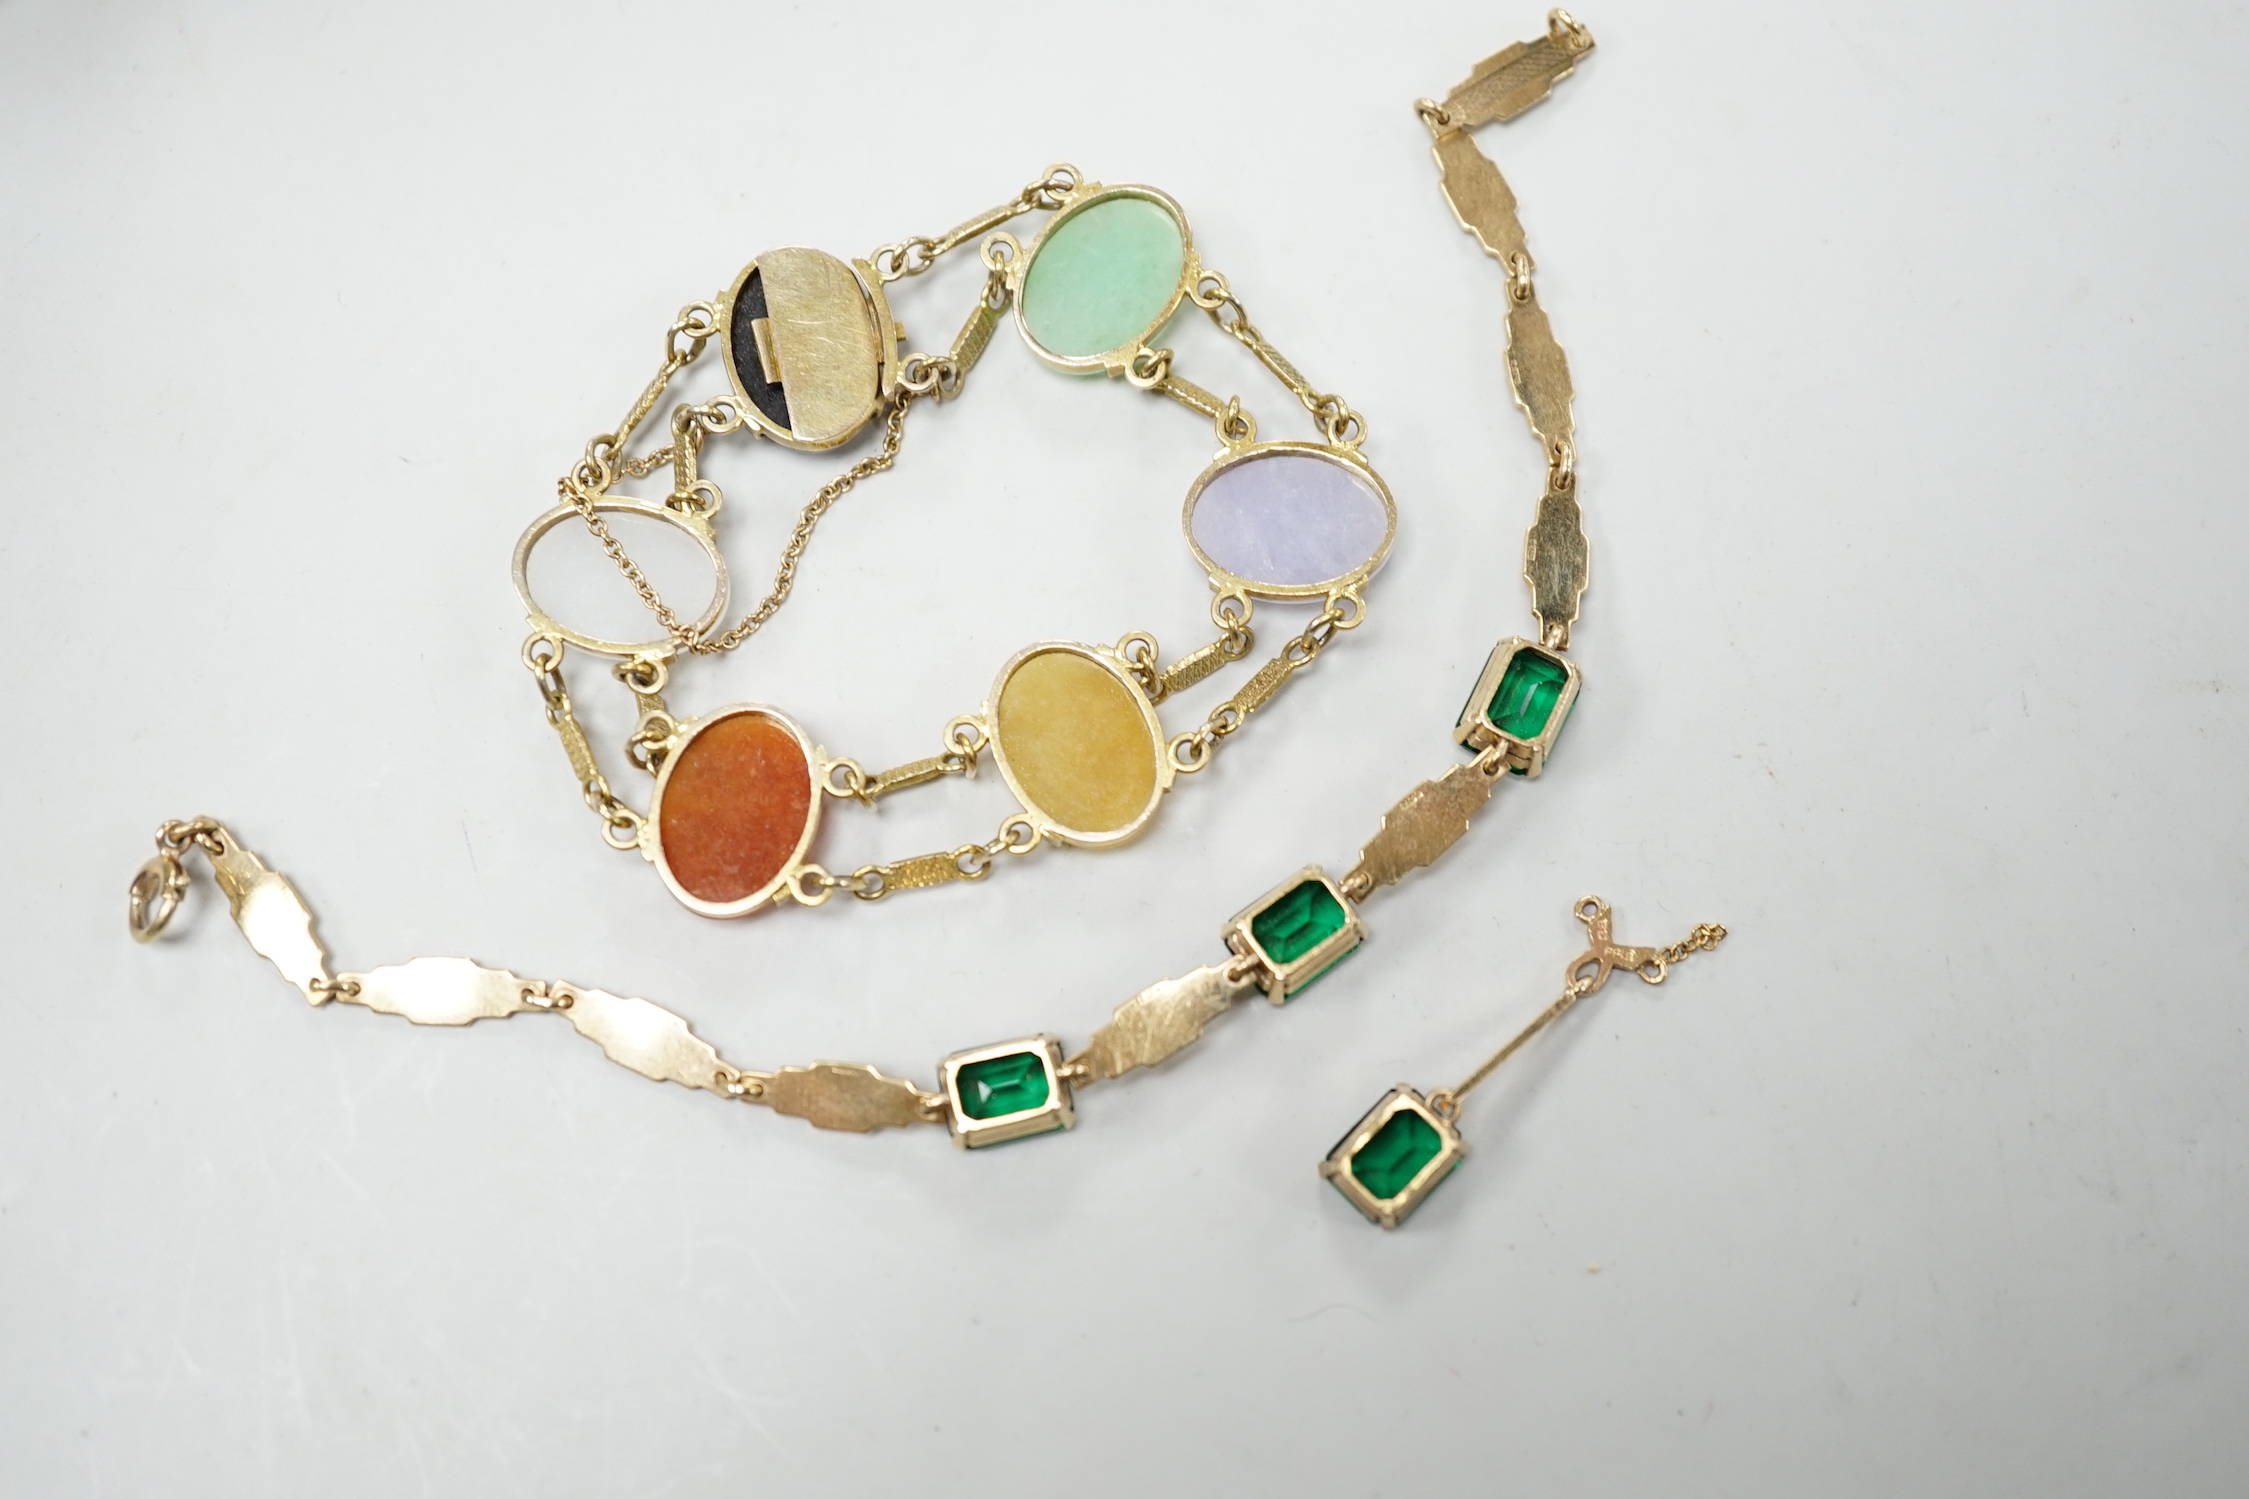 A yellow metal and semi precious cabochon stone set bracelet, 16cm, together with a 9ct gold and green stone set bracelet and one earring.